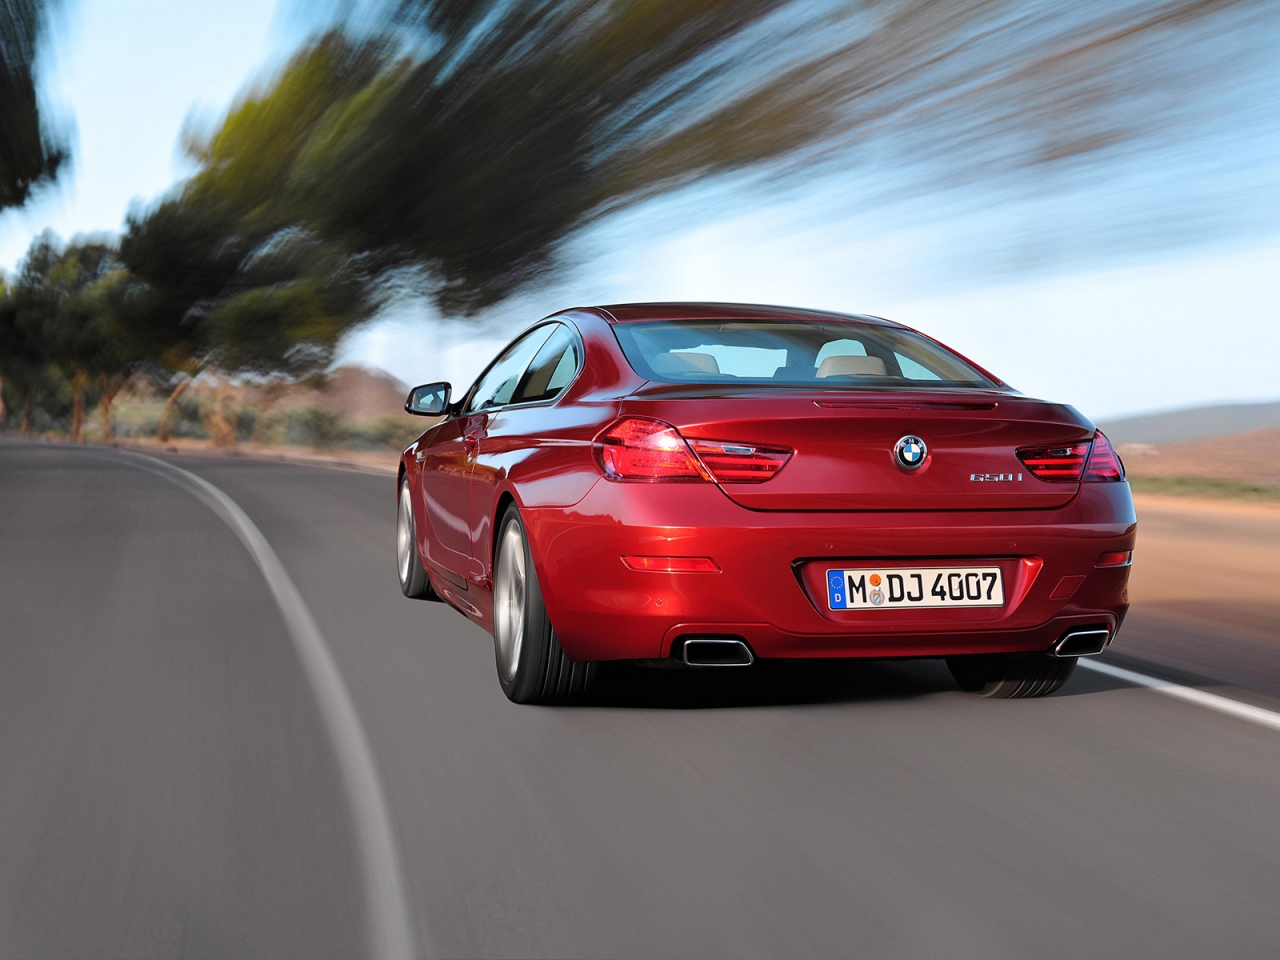 BMW 650i Coupe Rear for 1280 x 960 resolution